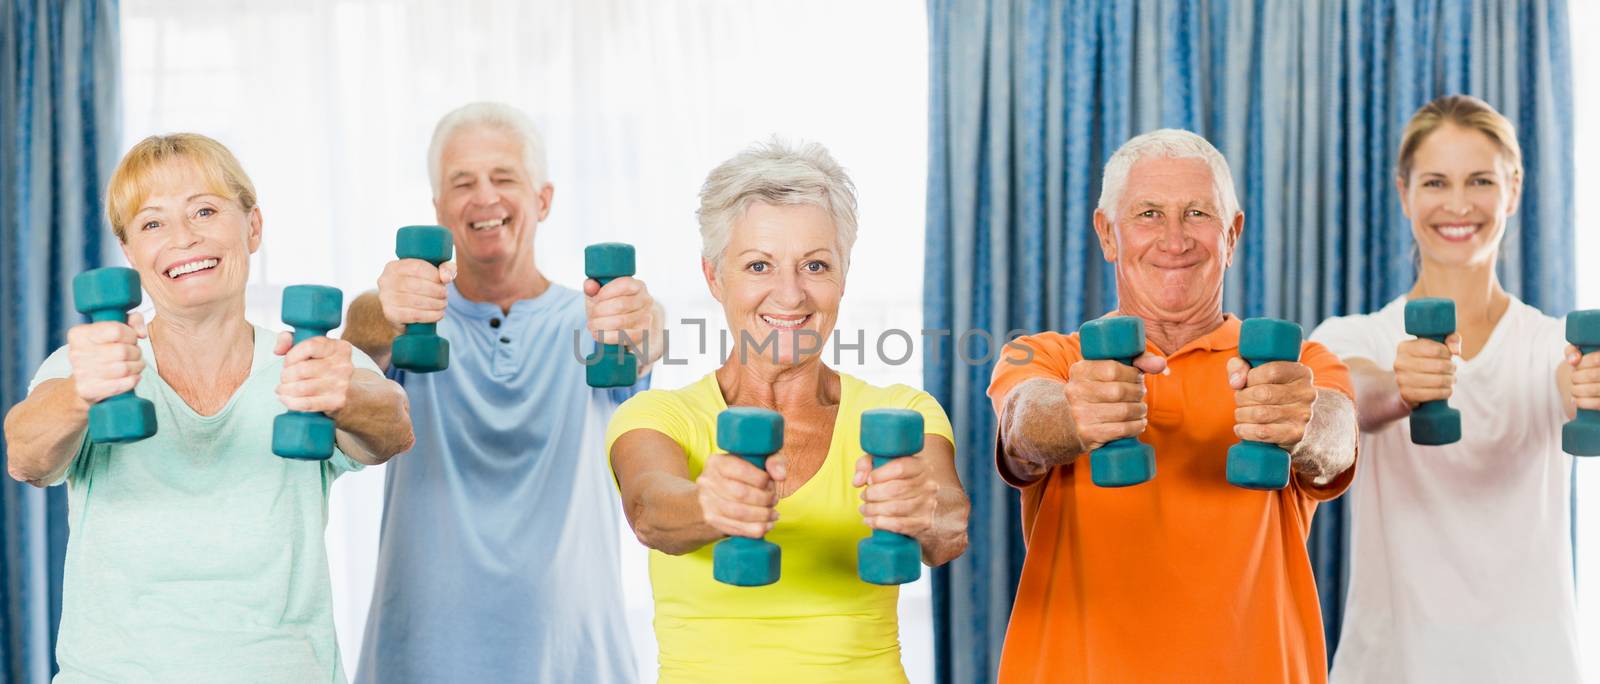 Seniors exercising with weights by Wavebreakmedia